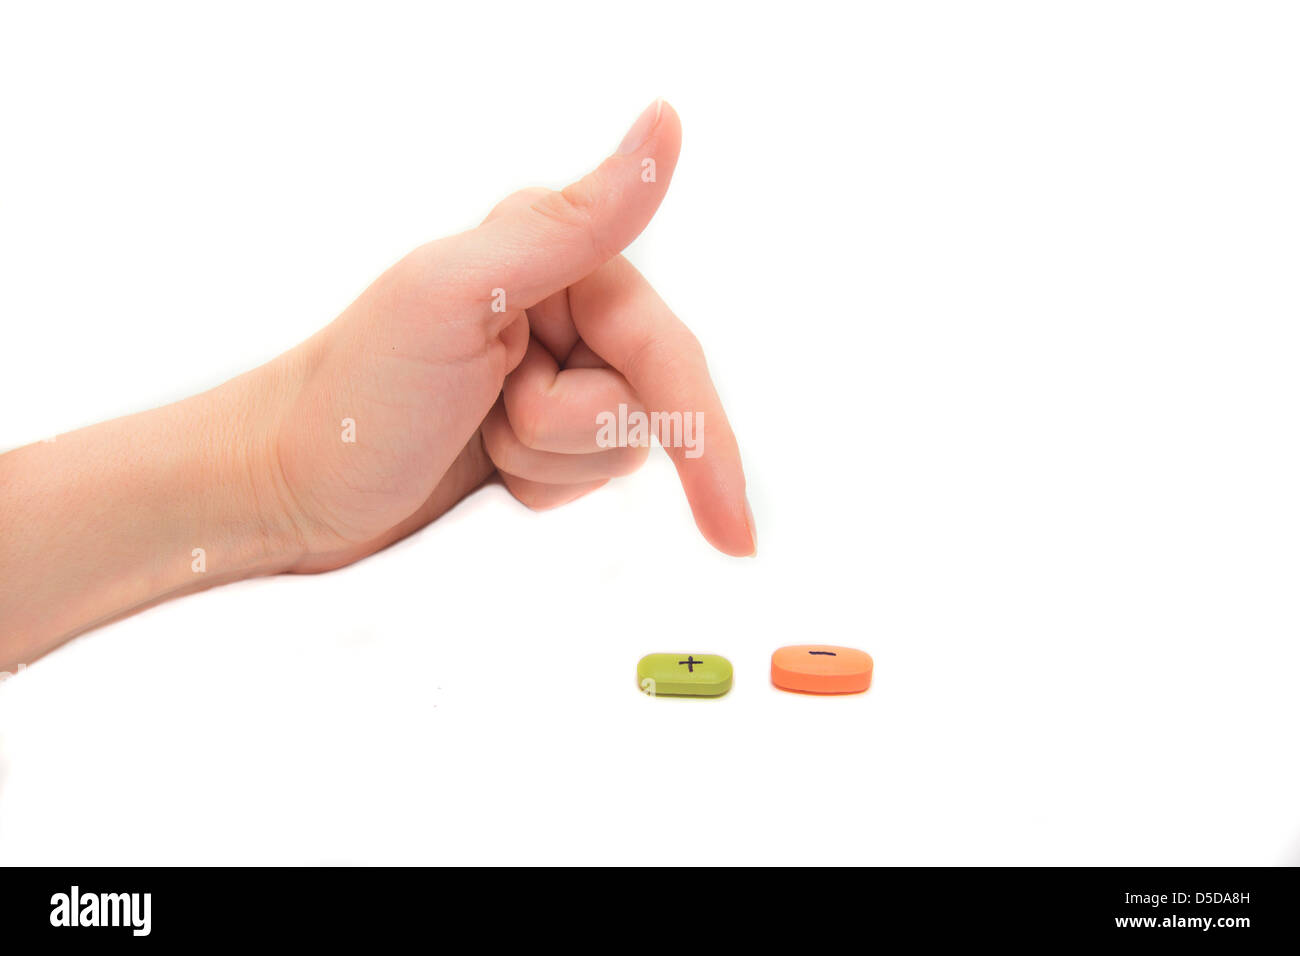 Tablets with plus and minus sign and female hand isolated on white. Choice concept. Stock Photo